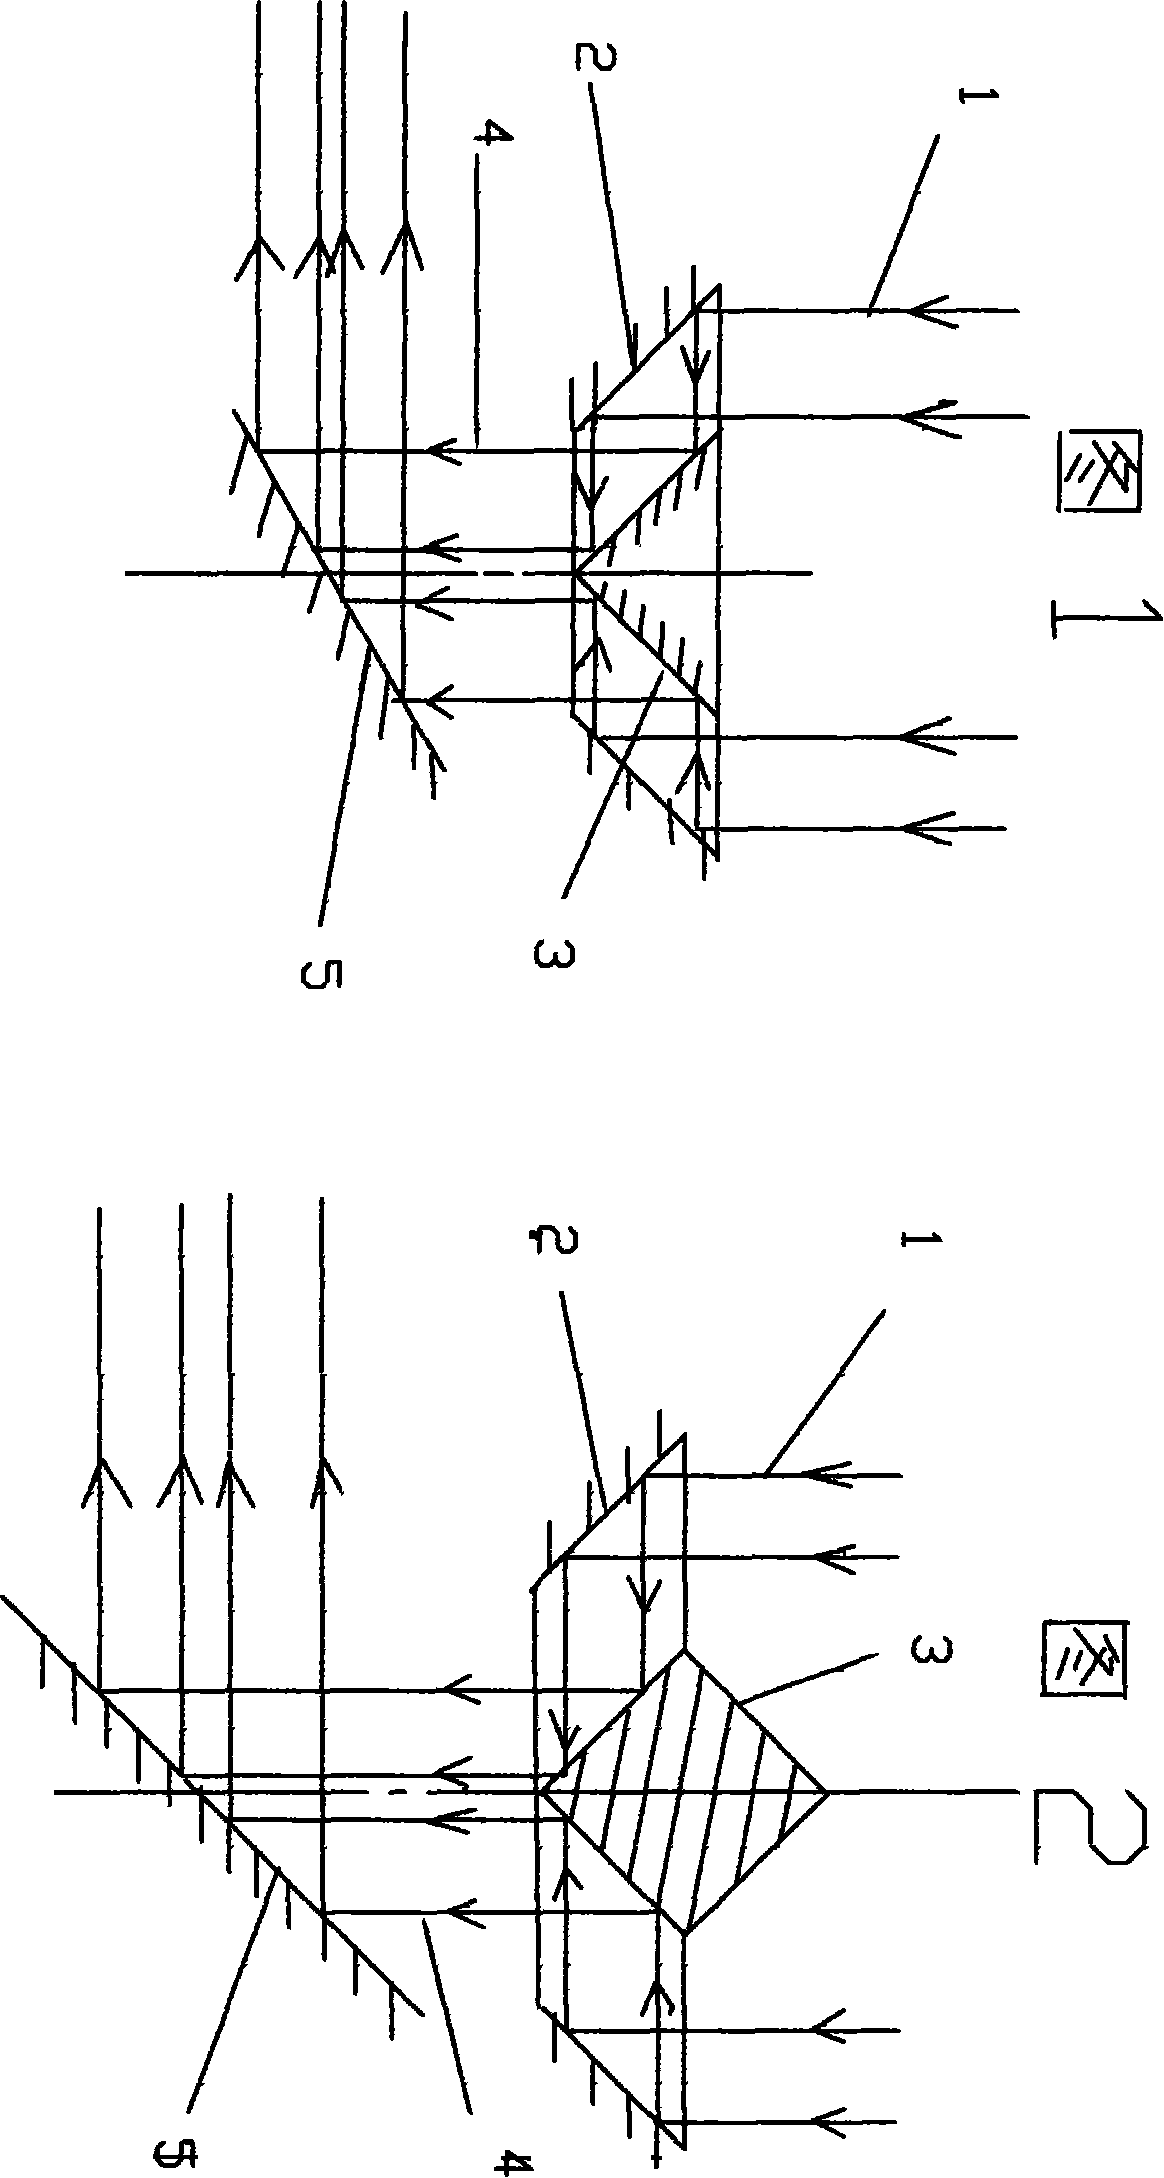 Method for parallel light directly beaming parallel light or focusing light and high-energy high stream intensity device